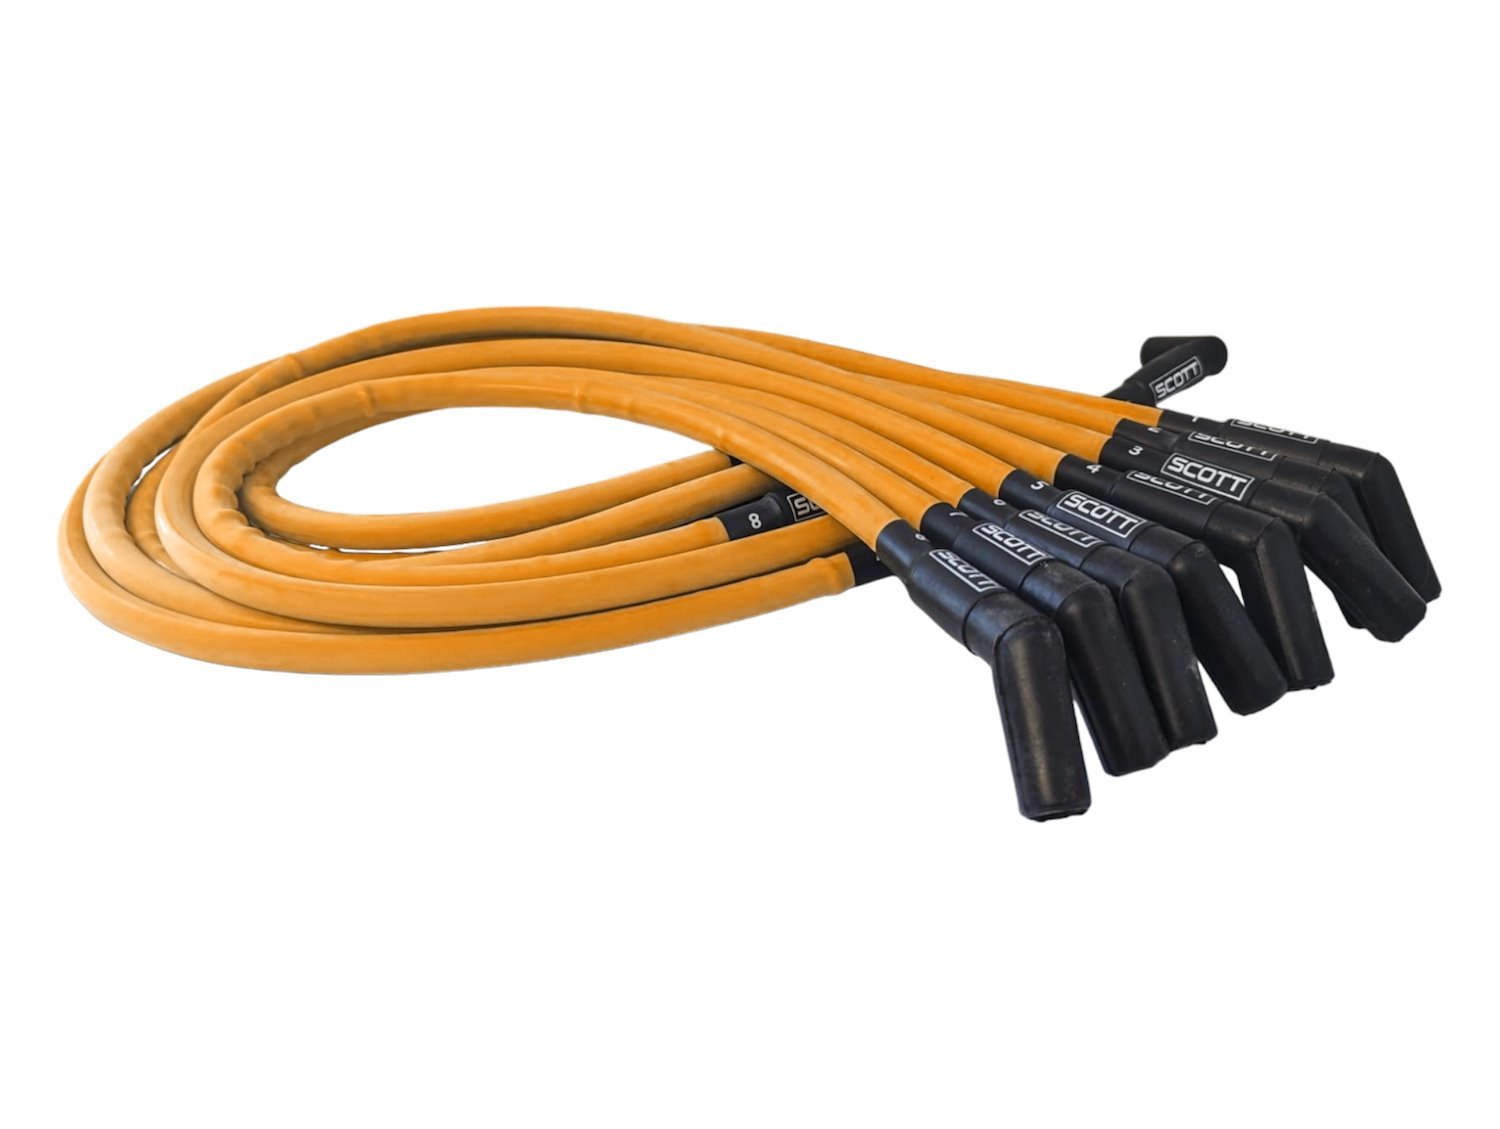 SPW-CH-415-5 High-Performance Silicone-Sleeved Spark Plug Wire Set for Big Block Chevy, Over Valve Cover [Orange]